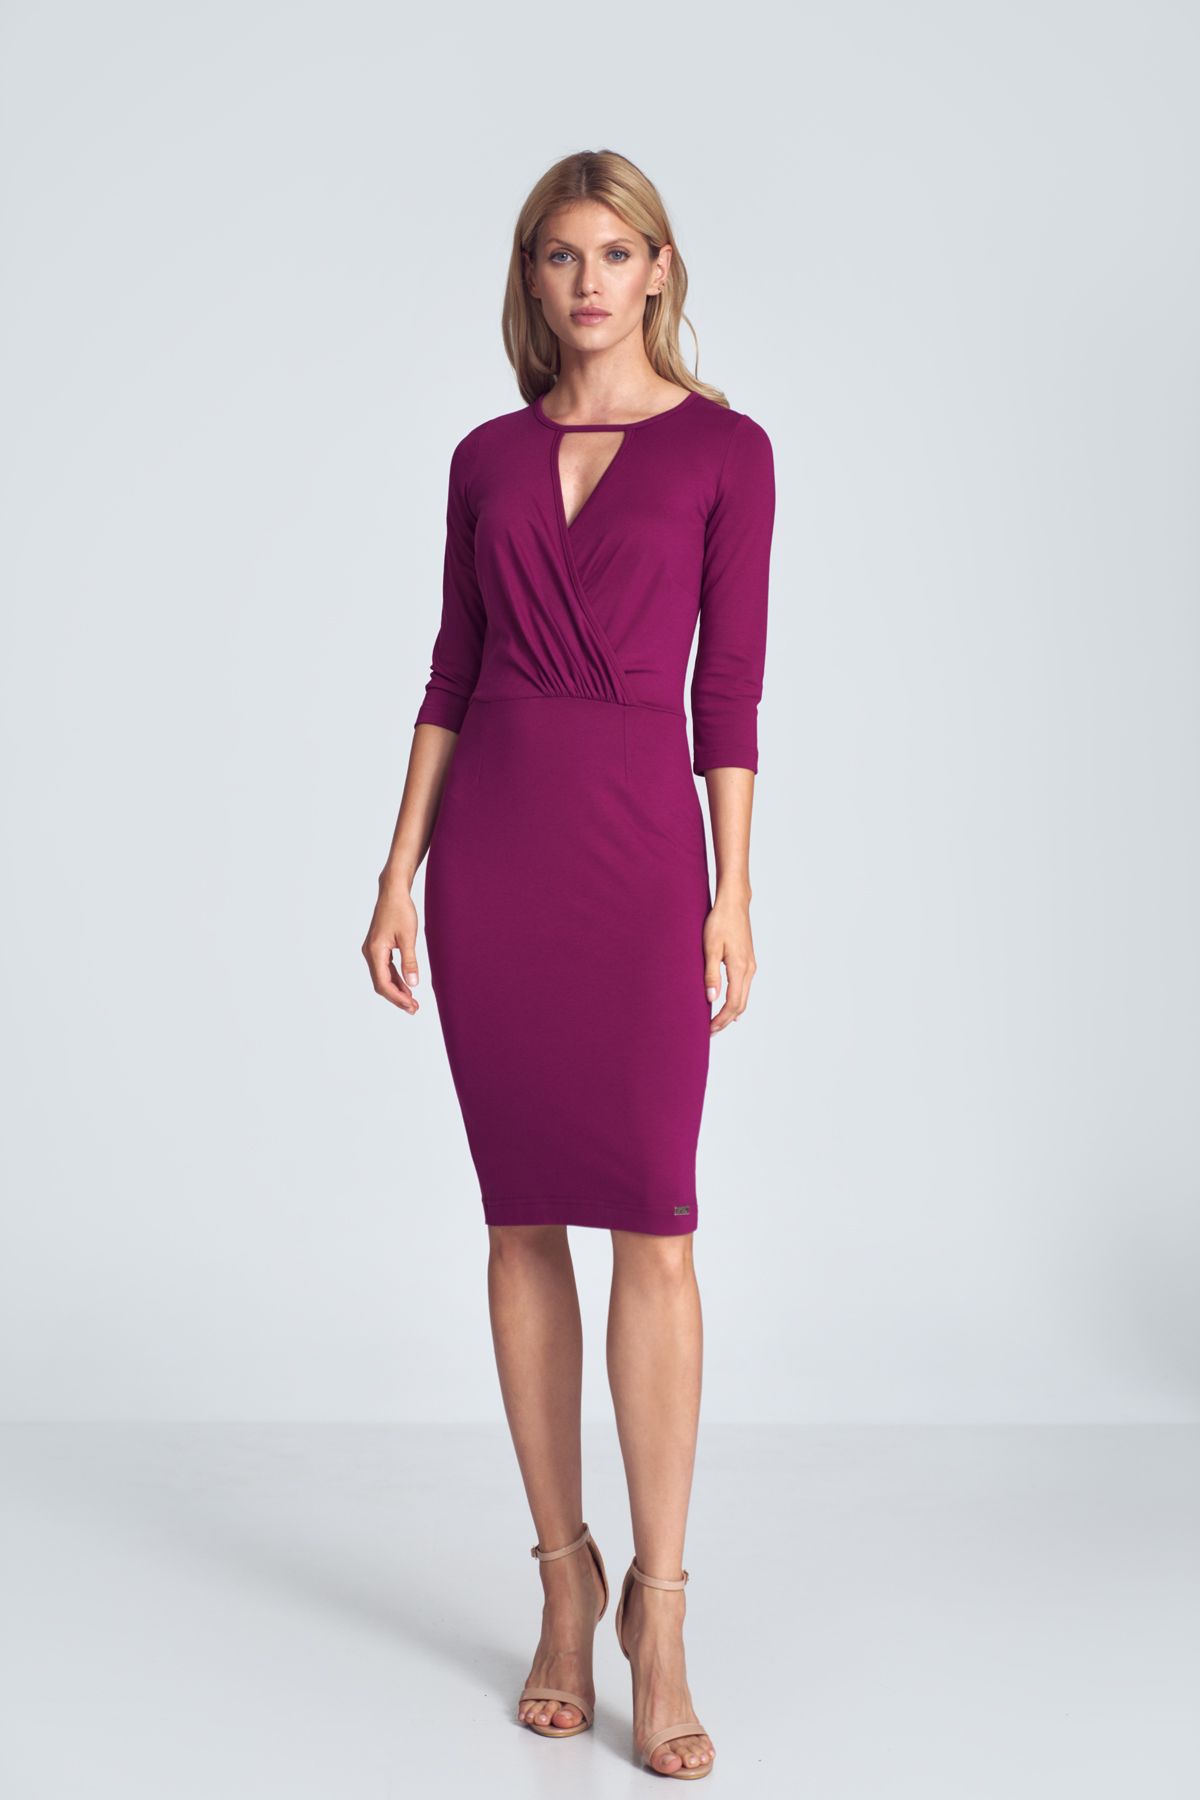 Fuchsia casual midi dress with wrap neckline finished with a decorative trim, pleats that emphasize the bust, stitched and creased at the waist. Sleeve ¾. Fastened at the back with a long covered zipper.